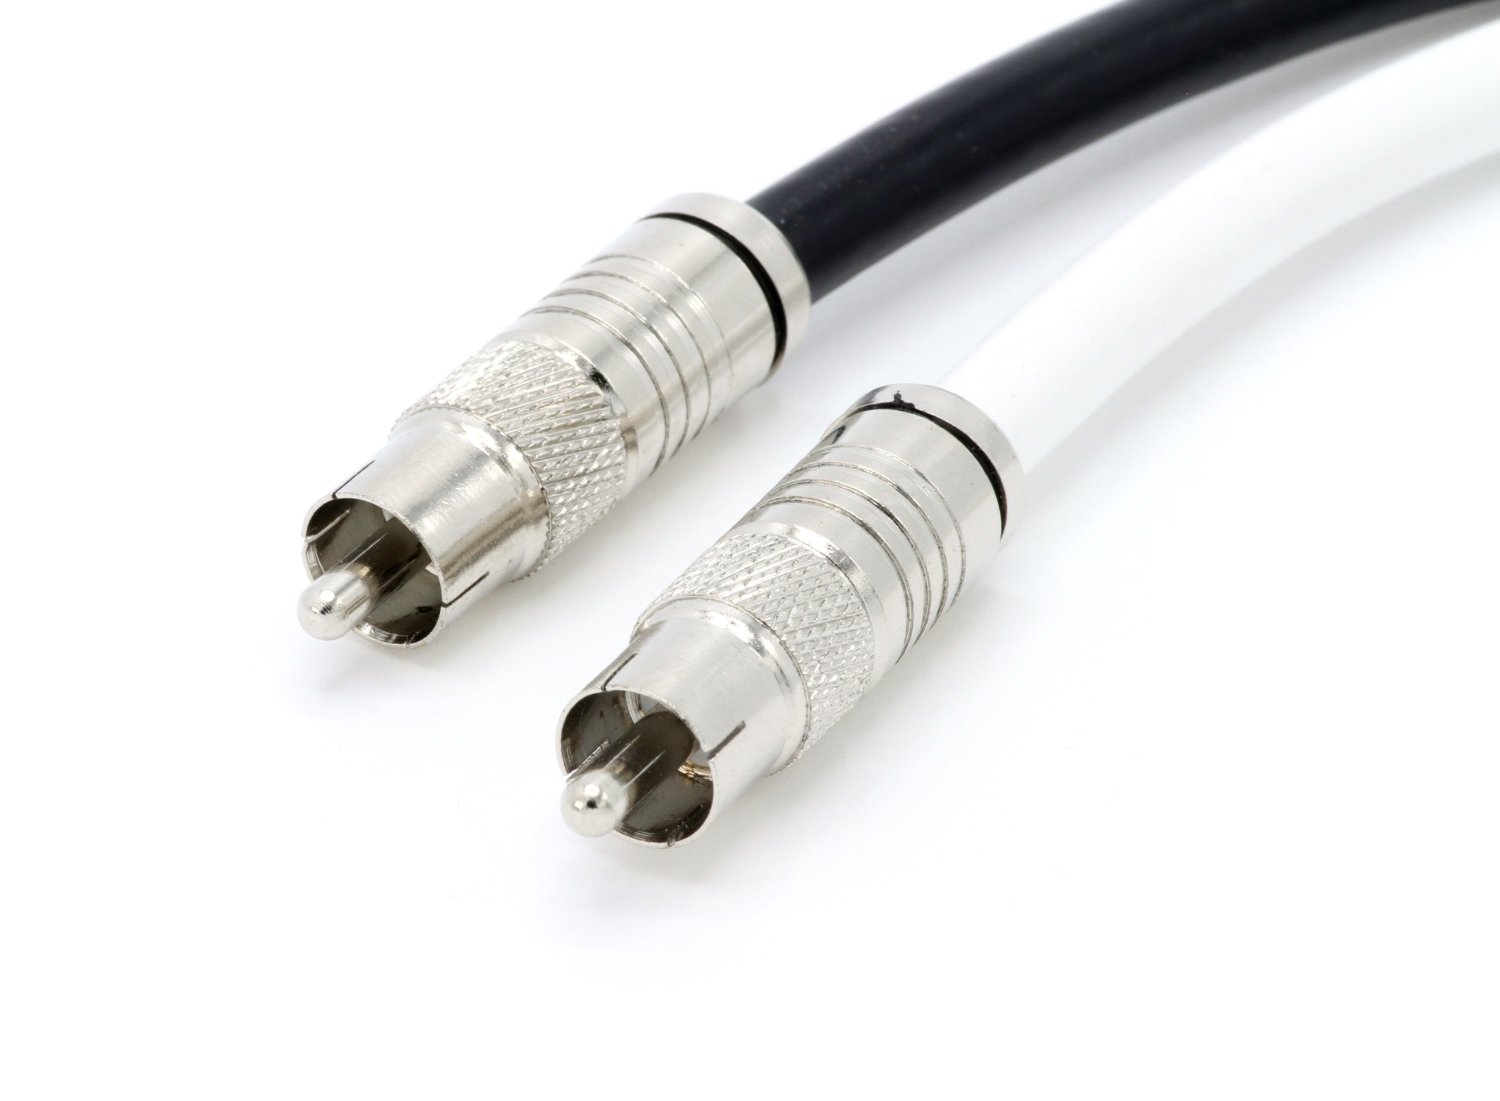 digital audio cable : digital coaxial cable with rca connections, 75 ohm  coax, proudly made in the usa : subwoofer cable  (s/pdif) white rca cable, 6 feet - image 5 of 6